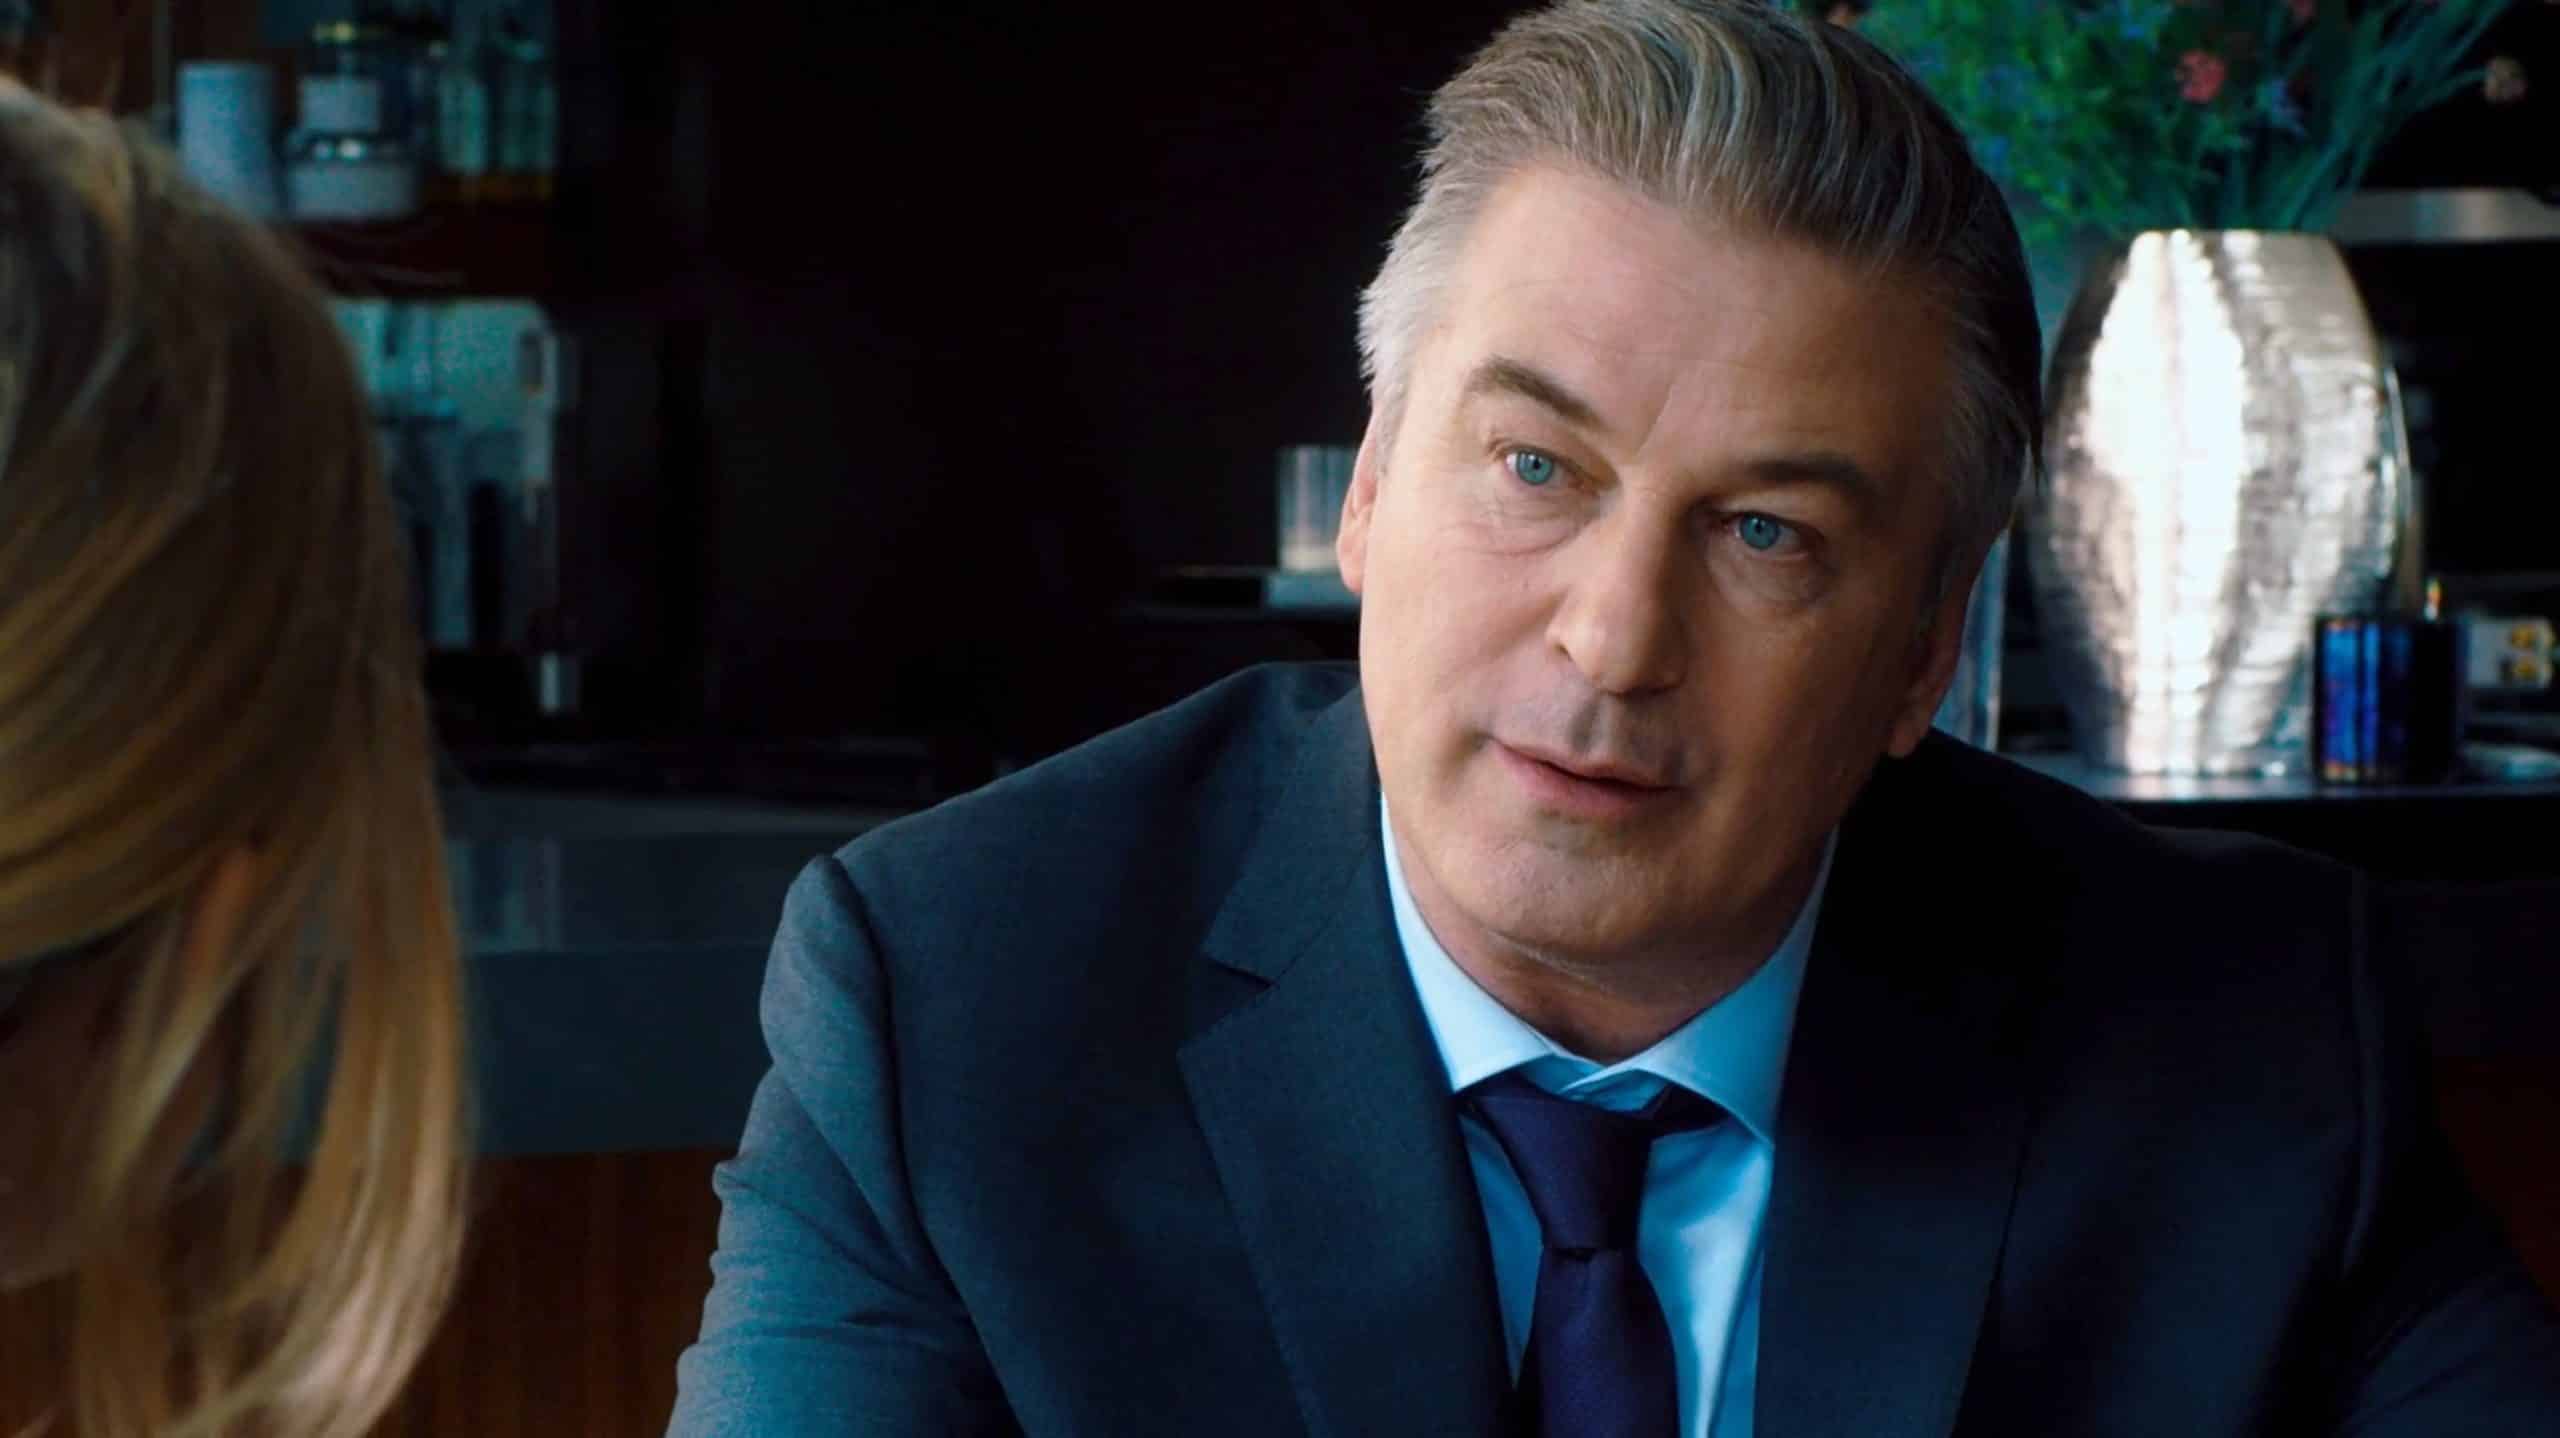 AN IMPERFECT MURDER, (aka THE PRIVATE LIFE OF A MODERN WOMAN), from left: Sienna Miller, Alec Baldwin, 2017